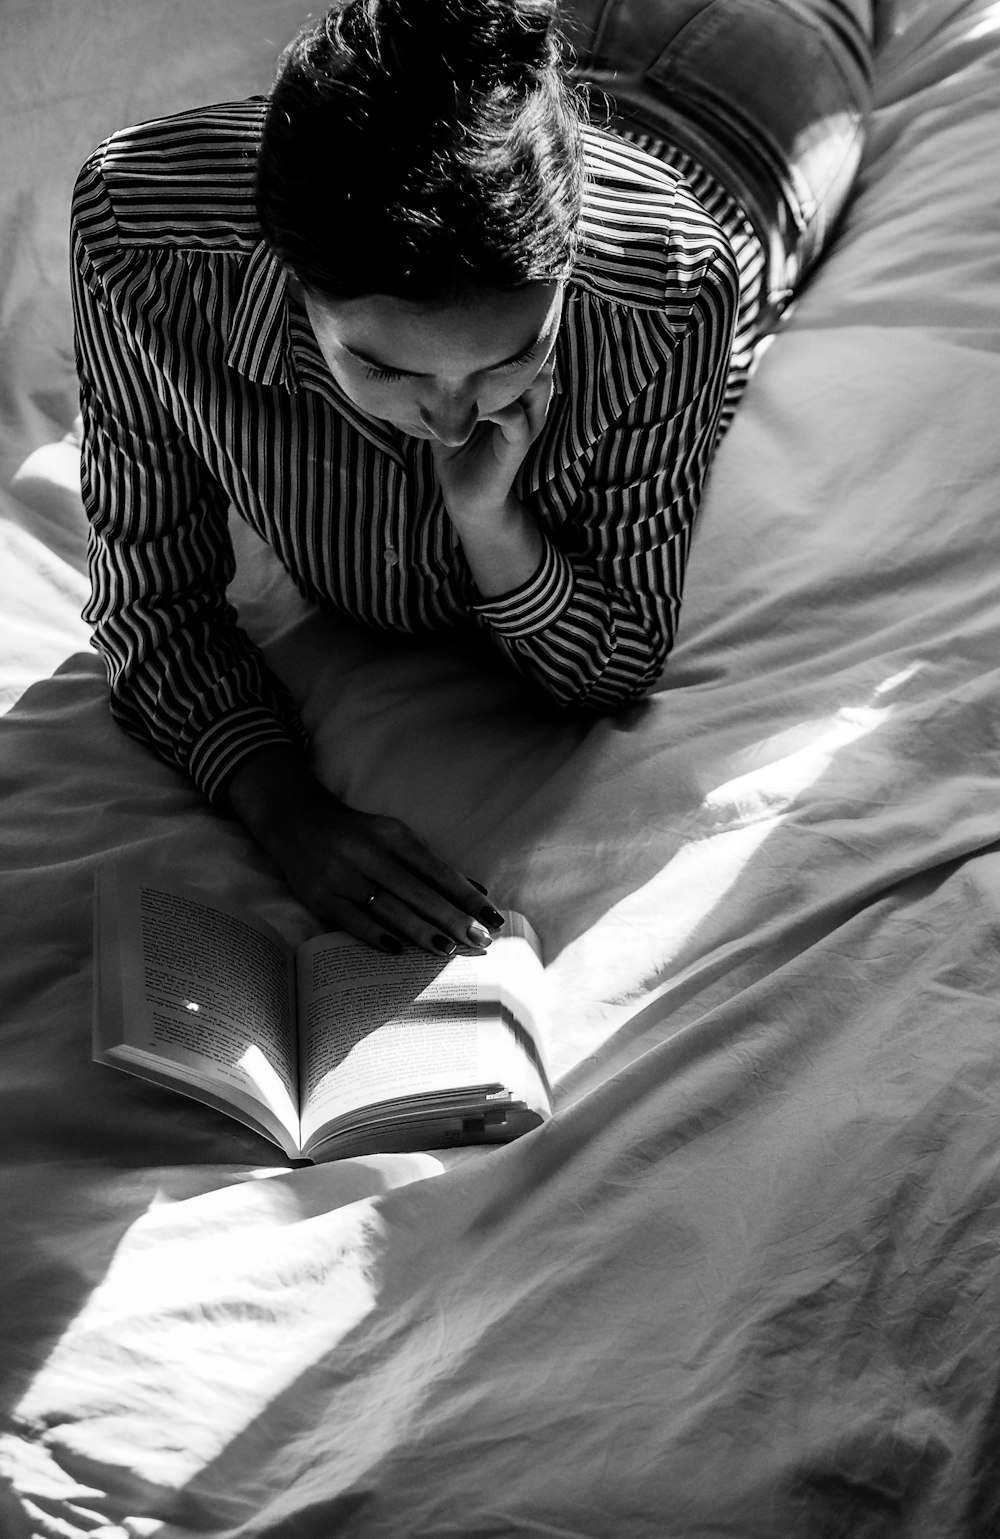 grayscale photo of man reading book on bed